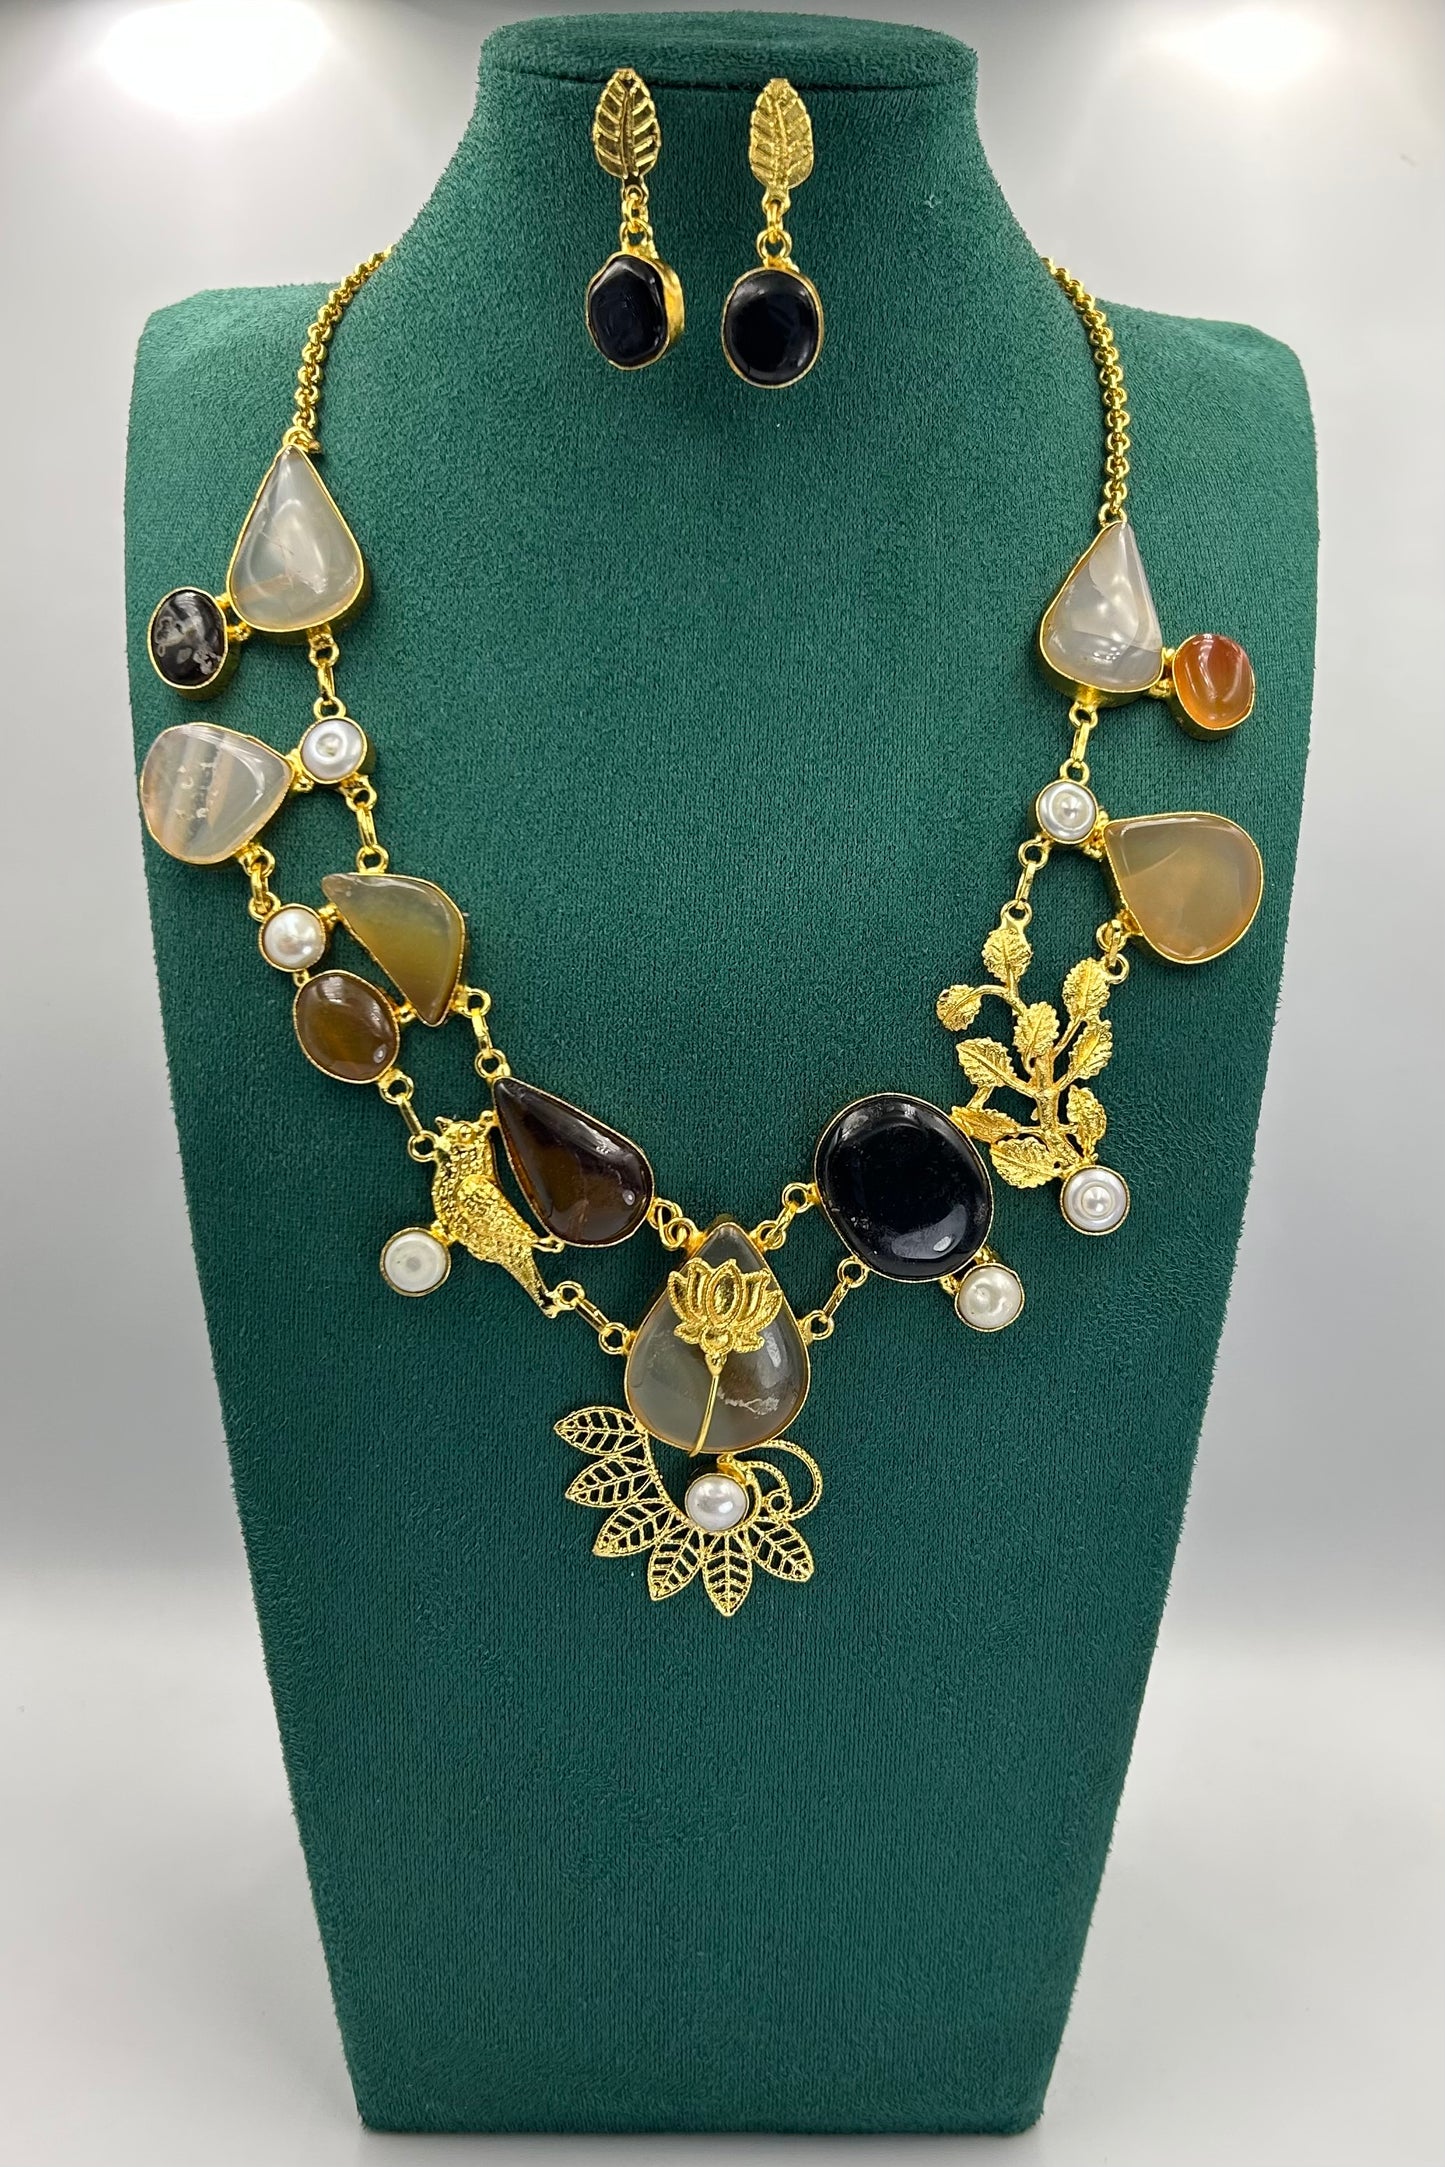 Isma Natural stones Statement Necklace